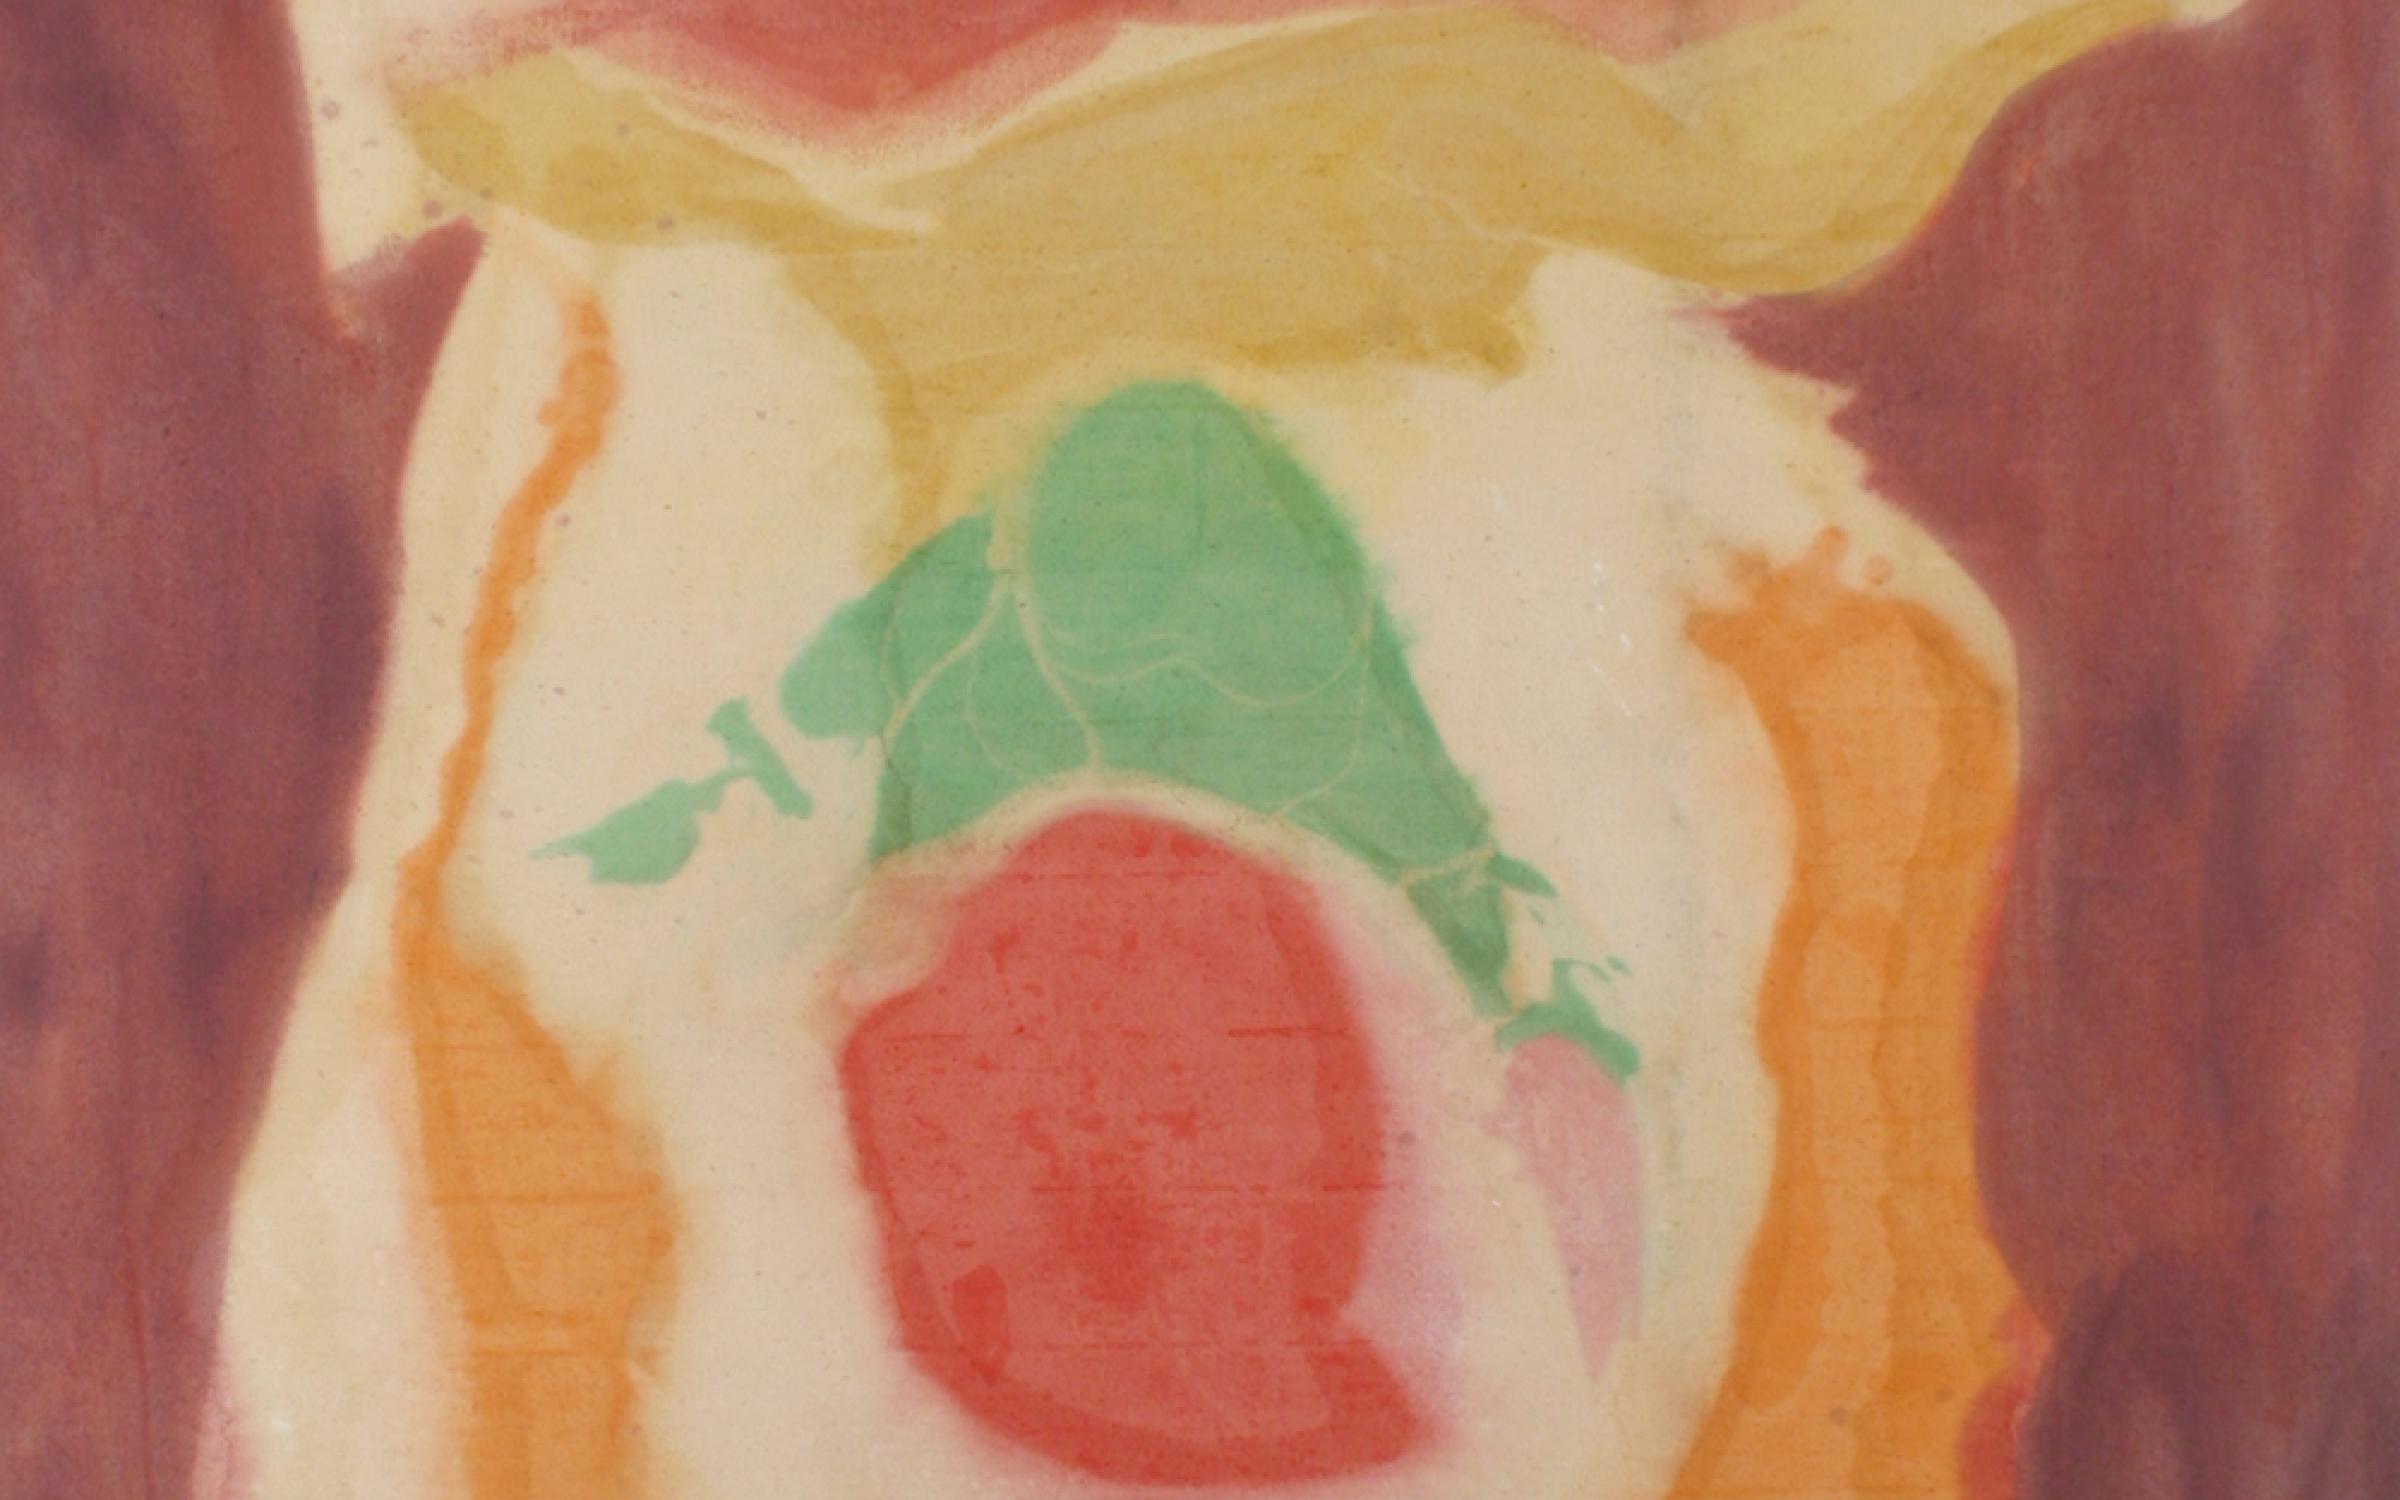 Helen Frankenthaler (American, 1928-2011) American Wizard, 1963, oil on canvas, 70 x 40 in, purchased with funds from the Phyllis Cannon Wattis Fund for Twentieth-Century Art with assistance from Friends of the Art Musuem, UMFA1999.36.1